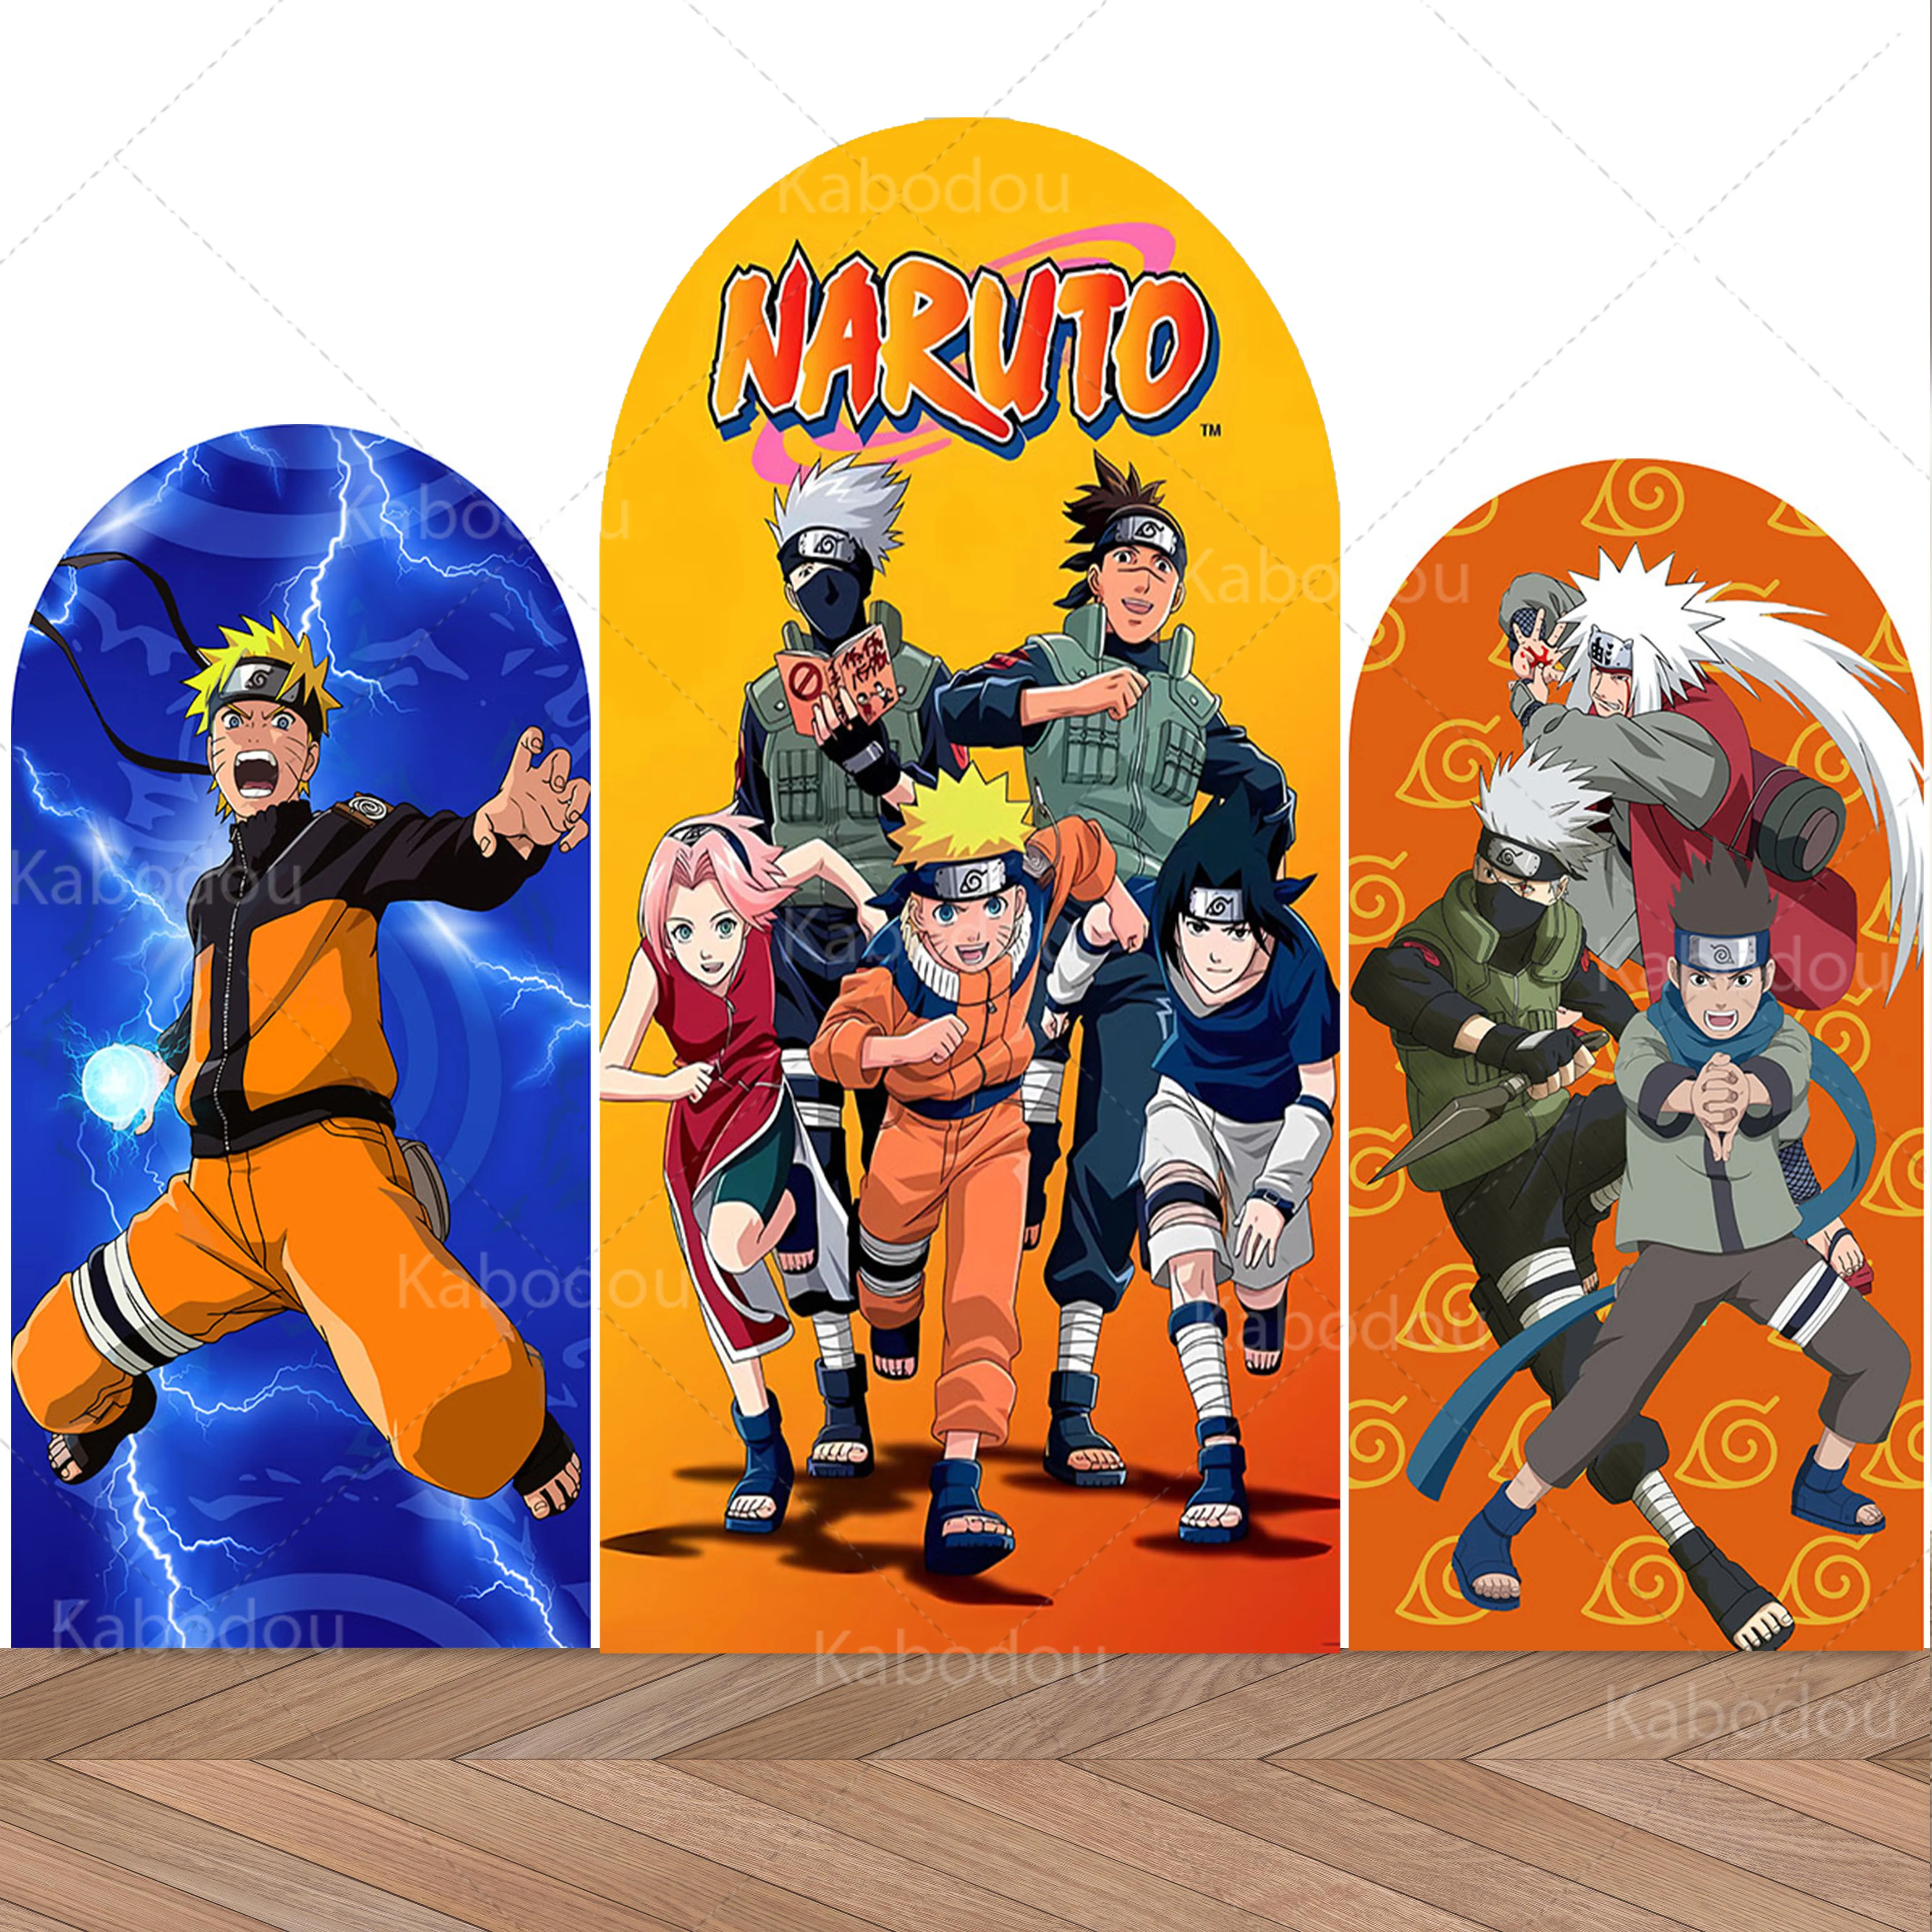 

Bandai Naruto Anime Backdrop Kids Birthday Party Decoration Doubleside Arch Photography Background Polyester Custom Studio Props